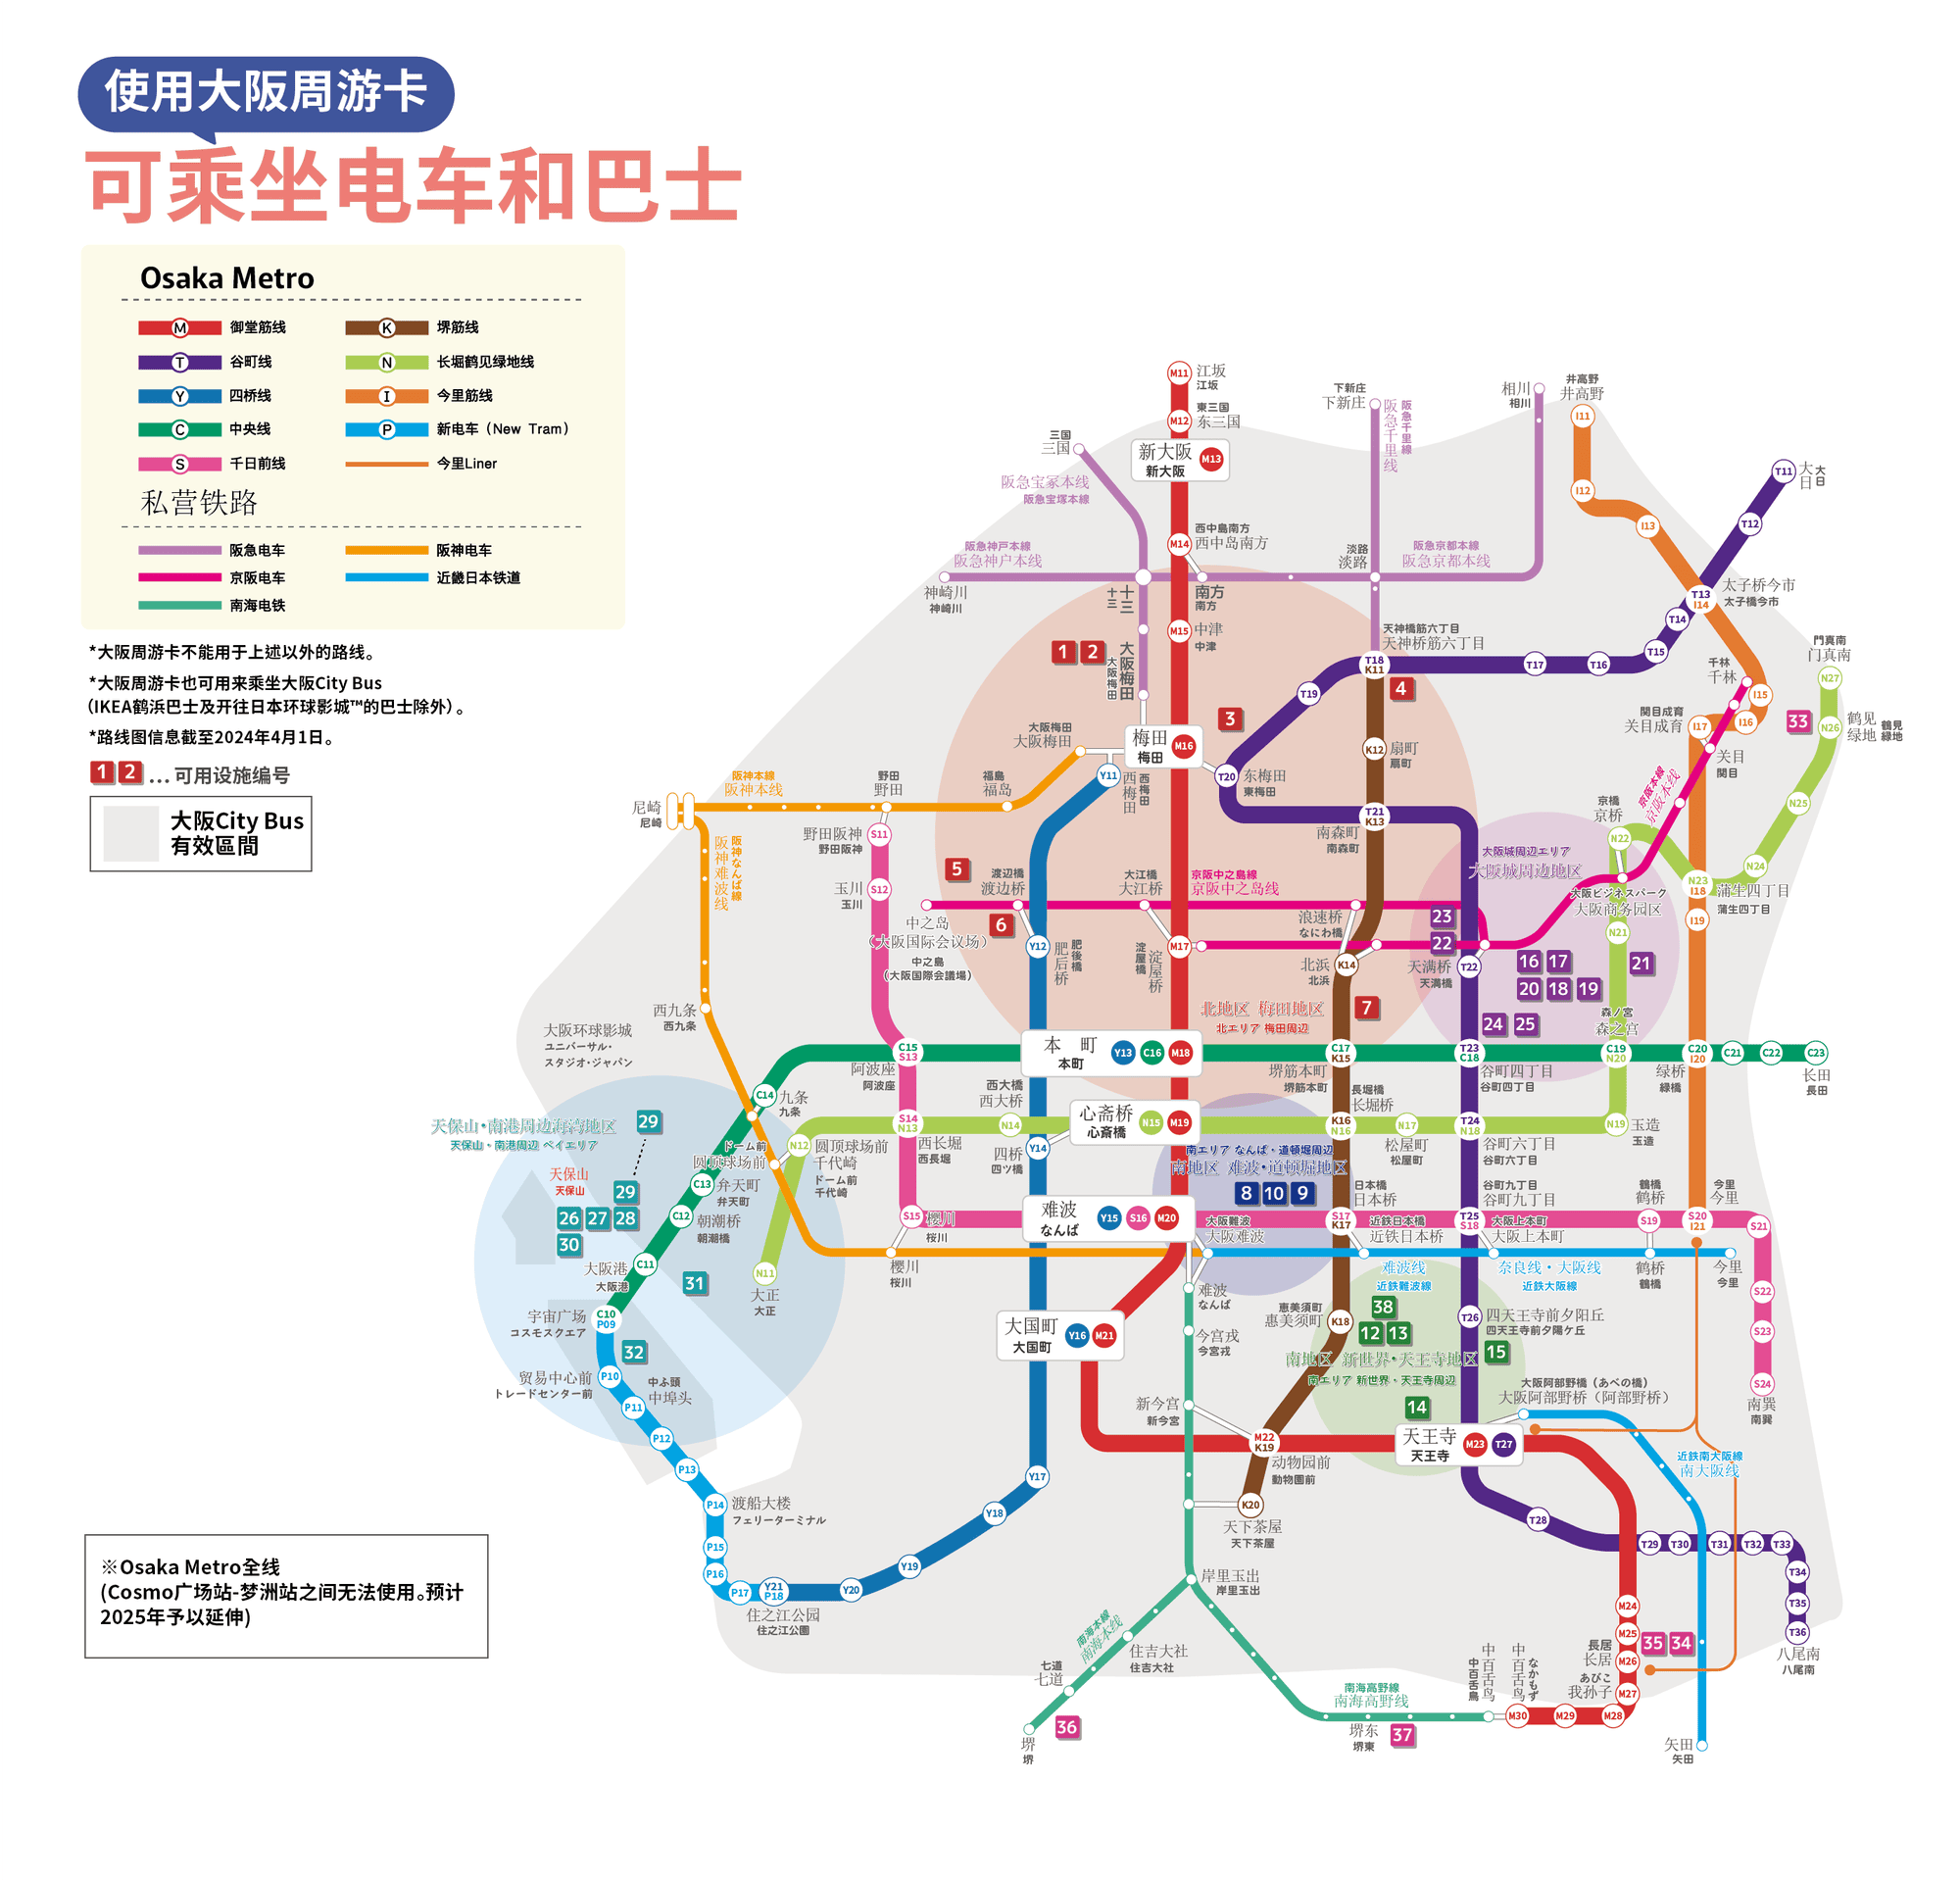 Trains and buses that can be used with the Osaka Amazing Pass